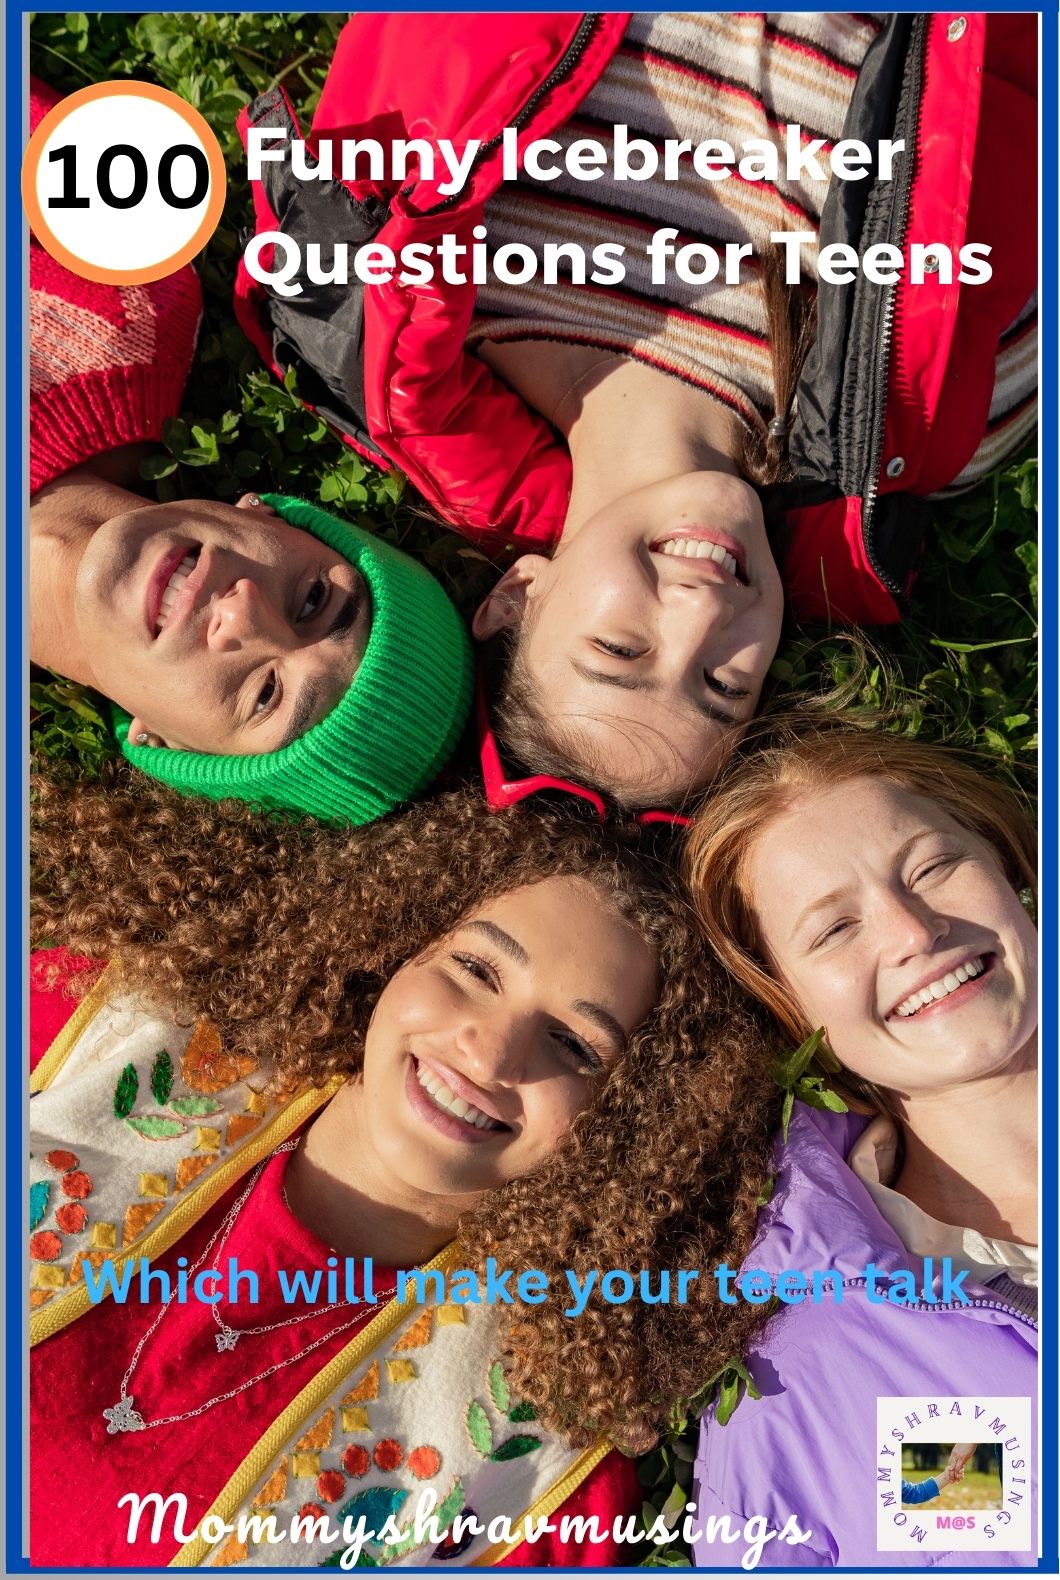 100 Funny Icebreaker Questions for Teens